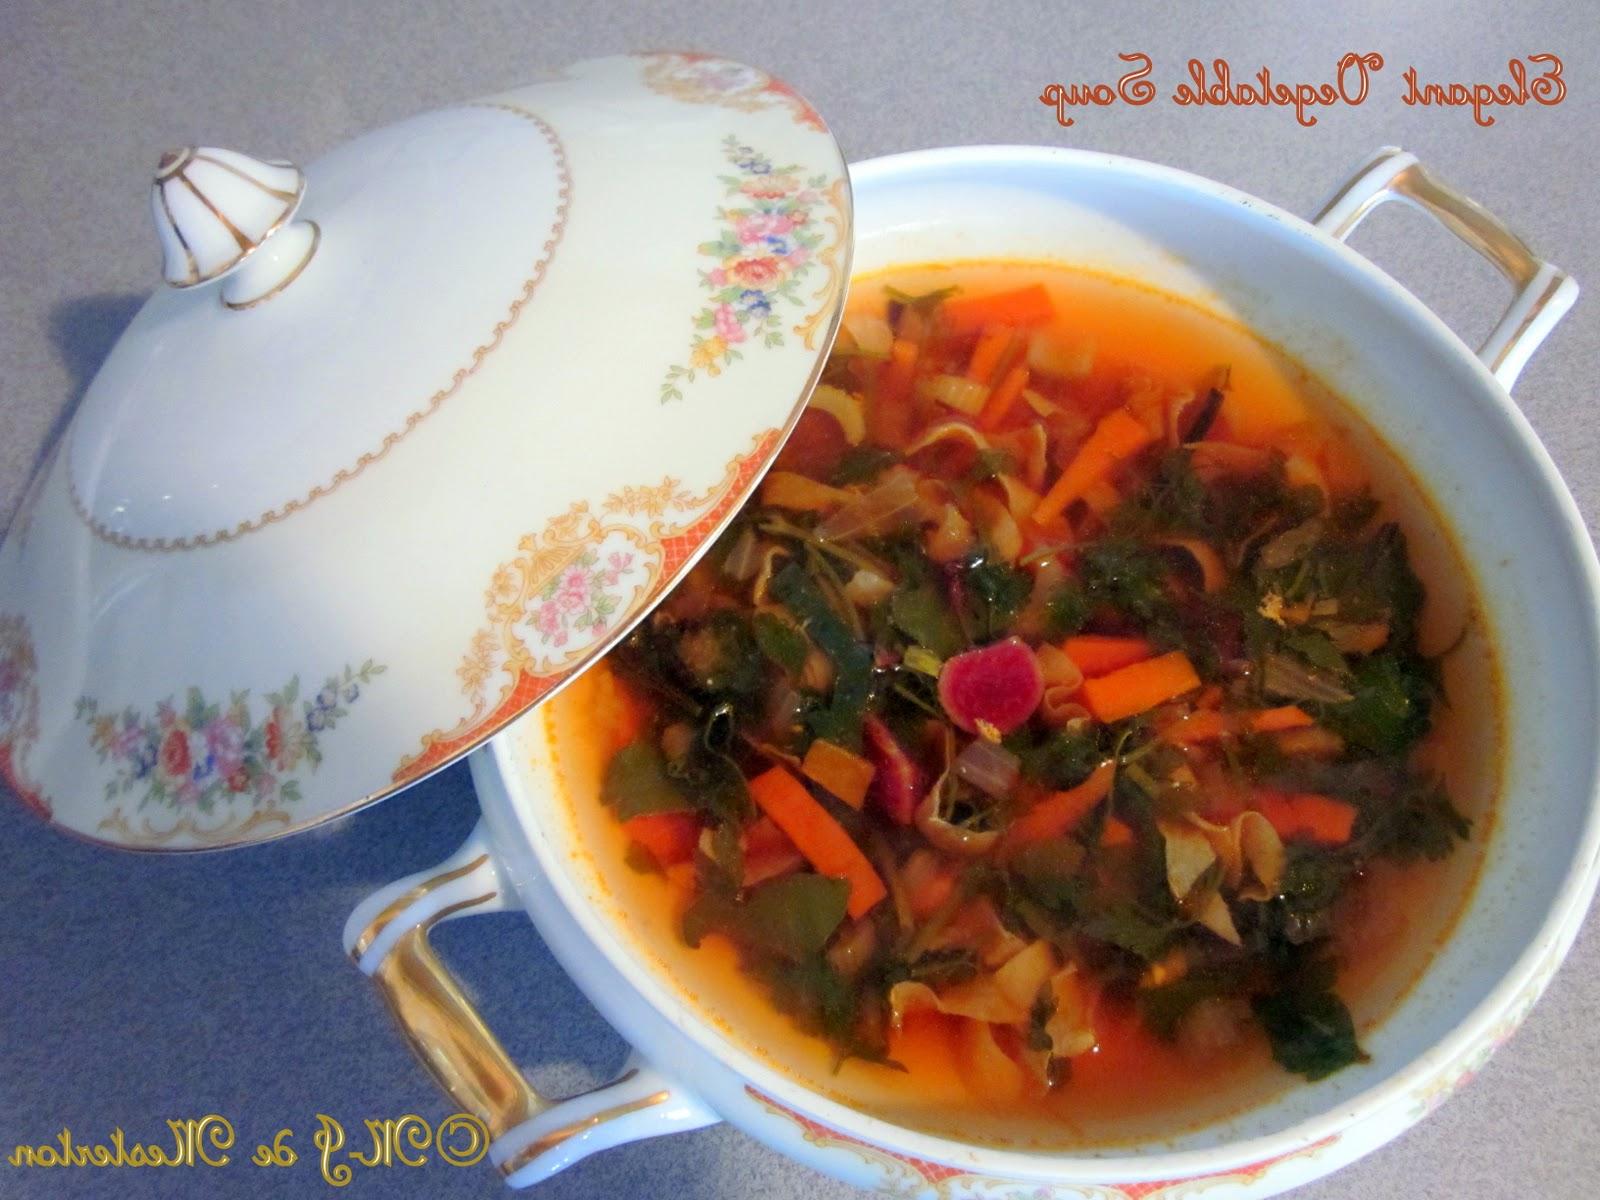 The elegant vegetable soup is ready to serve.